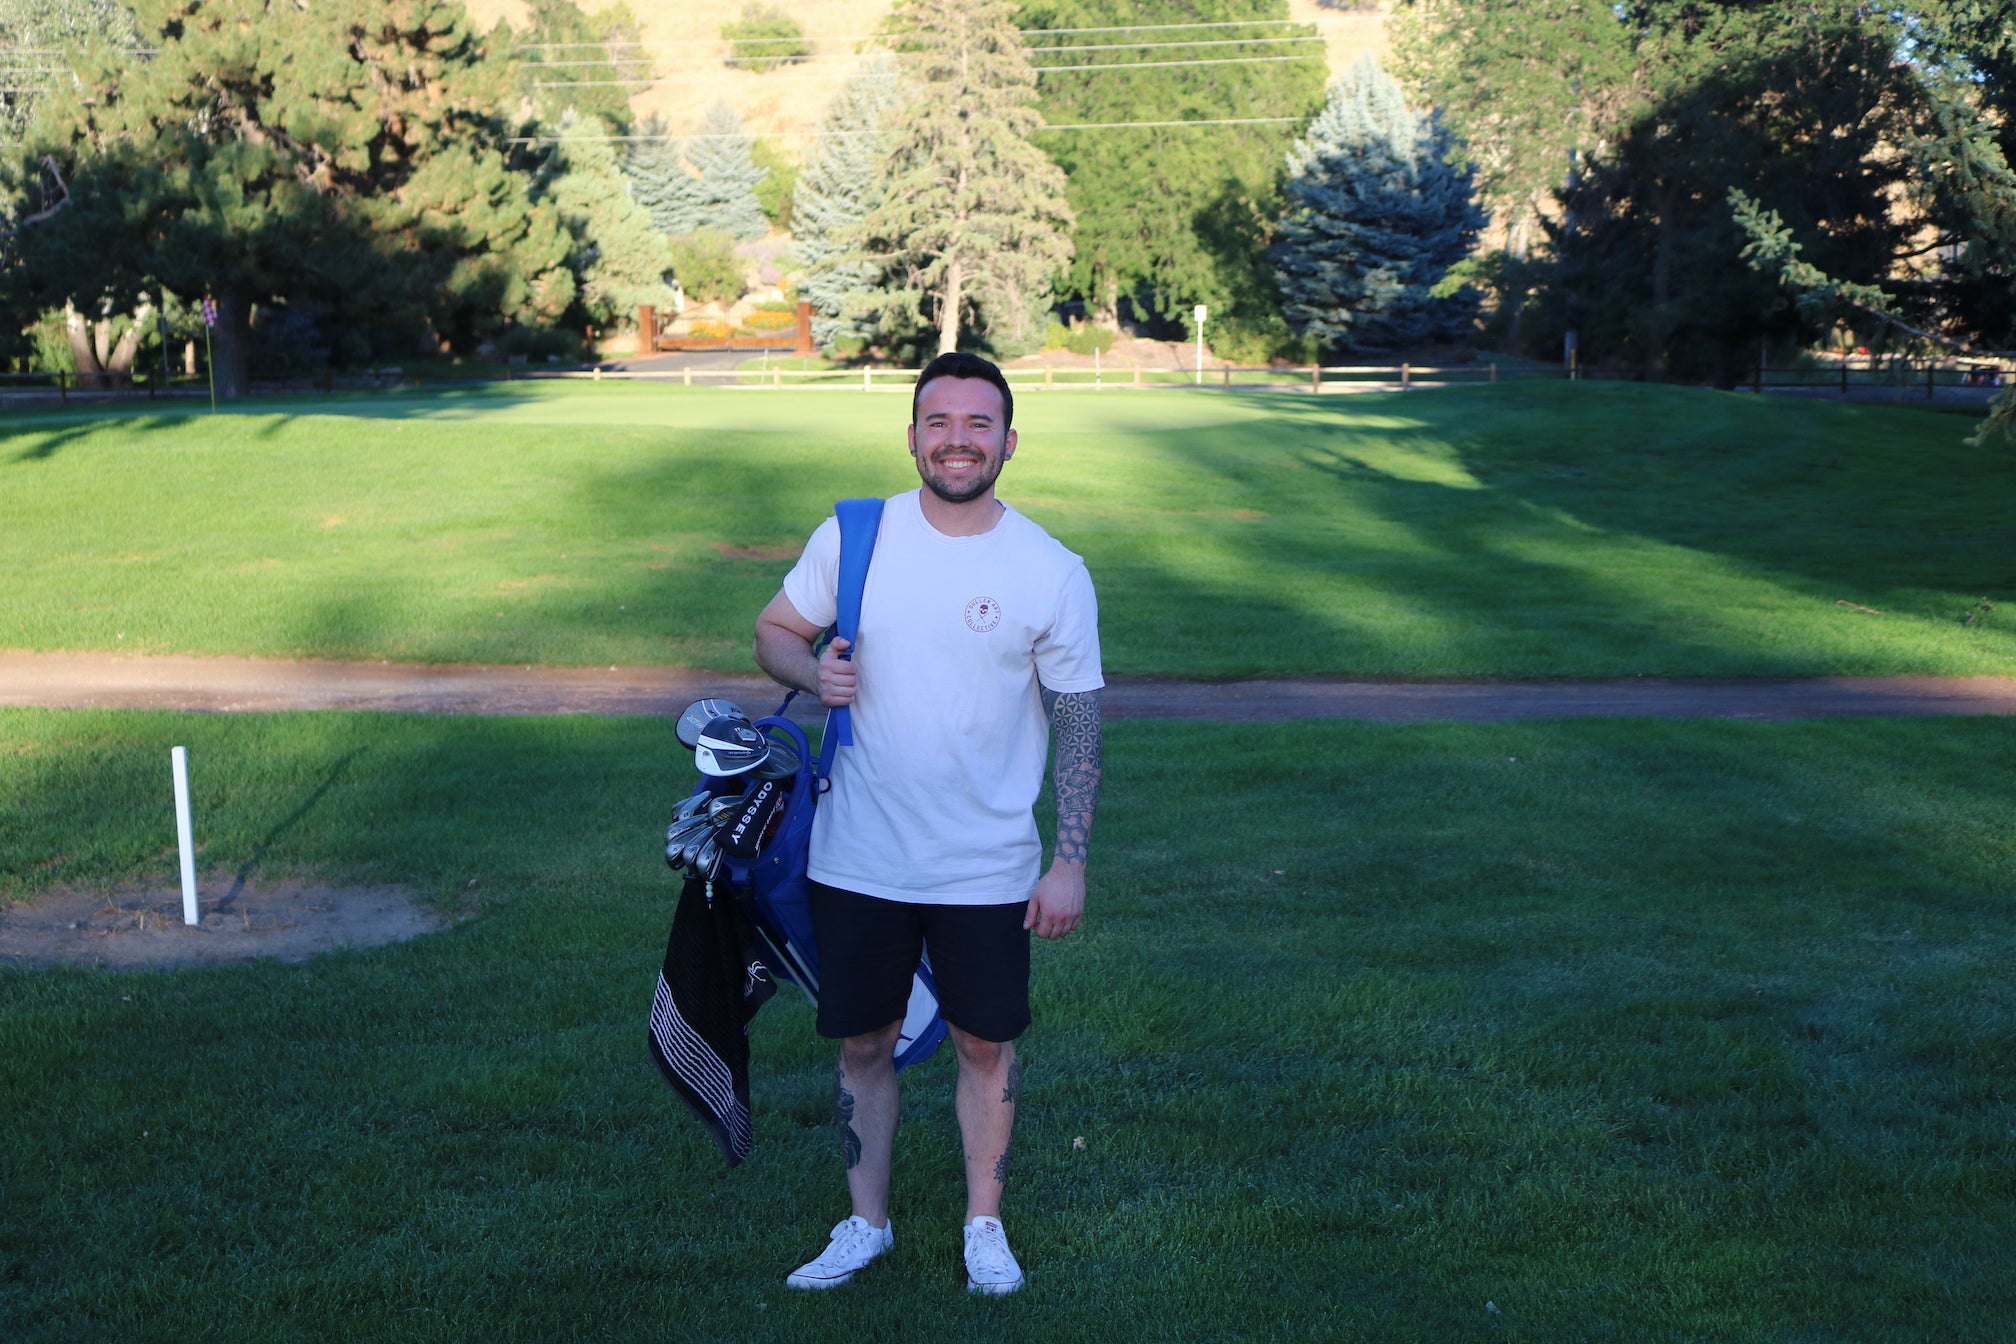 Chris Perry stands and smiles on the golf course with his clubs on his back